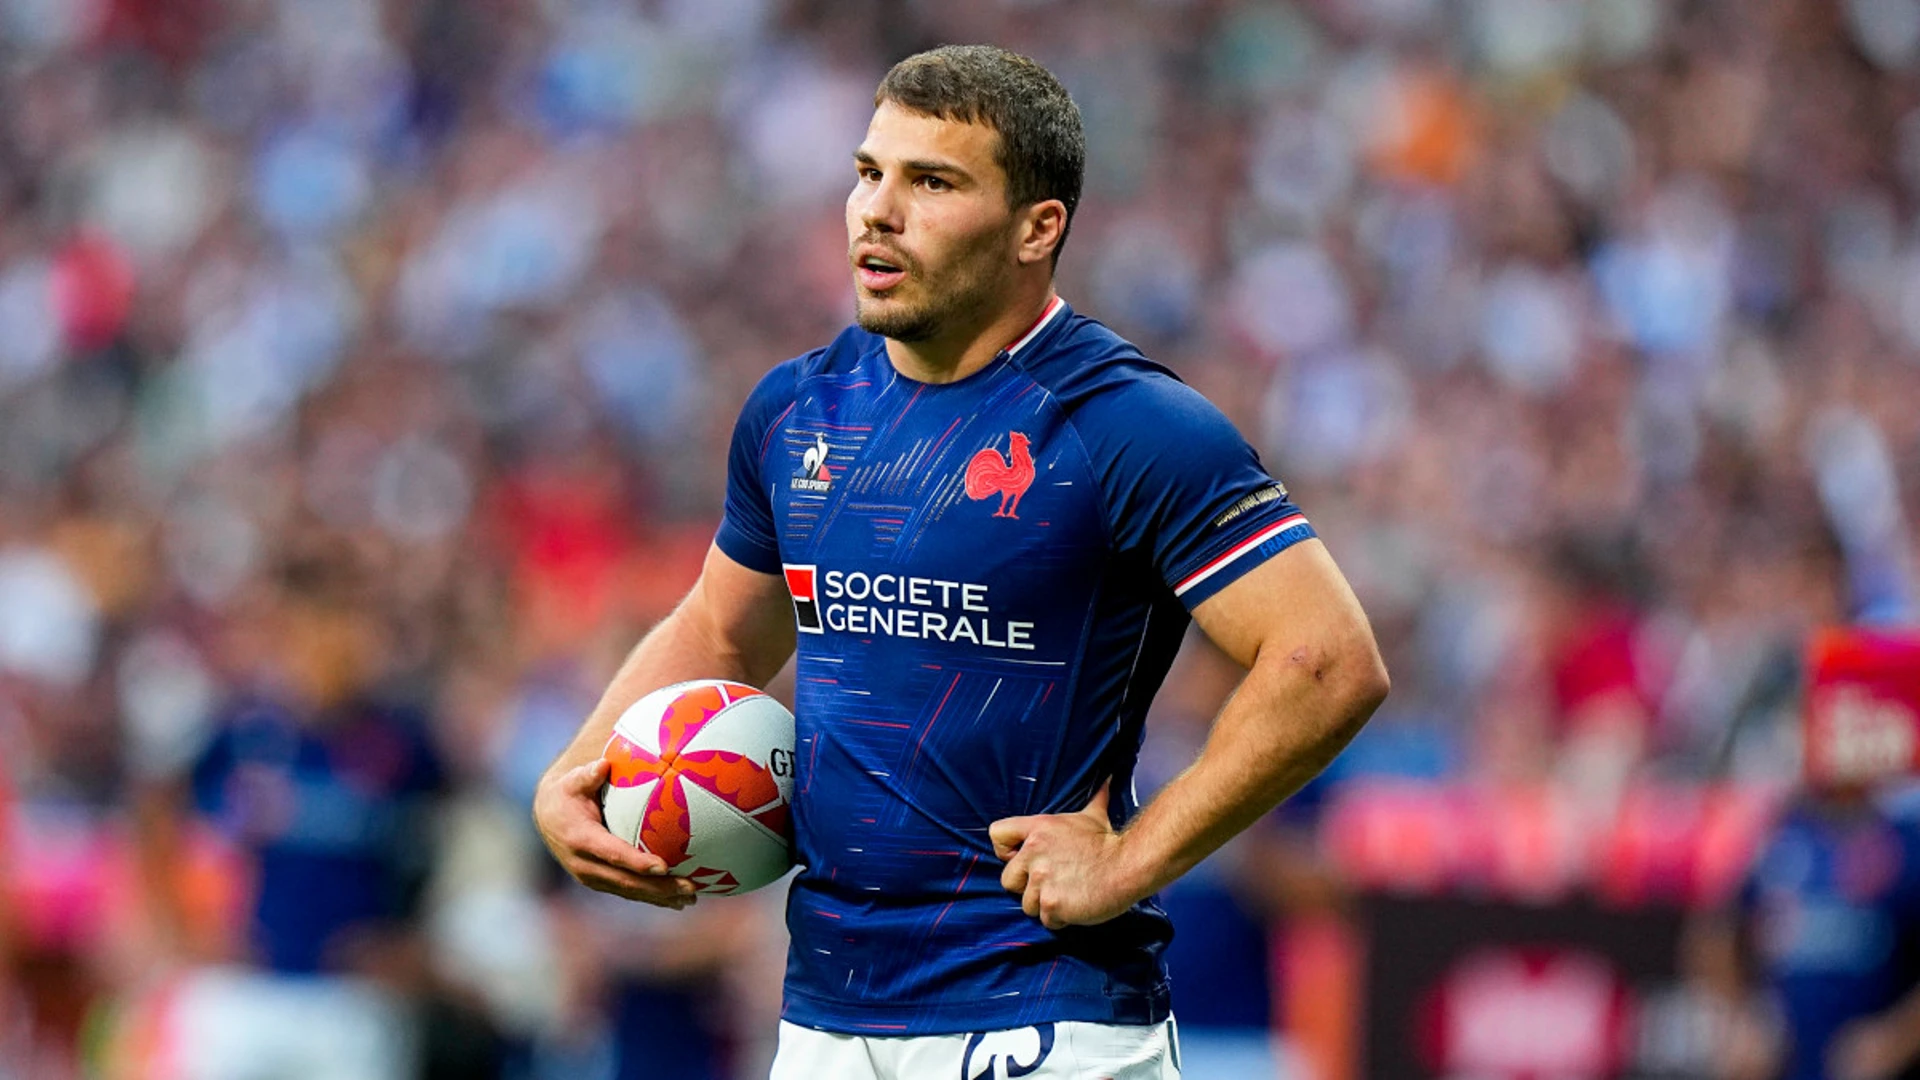 Dupont guarantees spotlight firmly on rugby sevens - Clerc